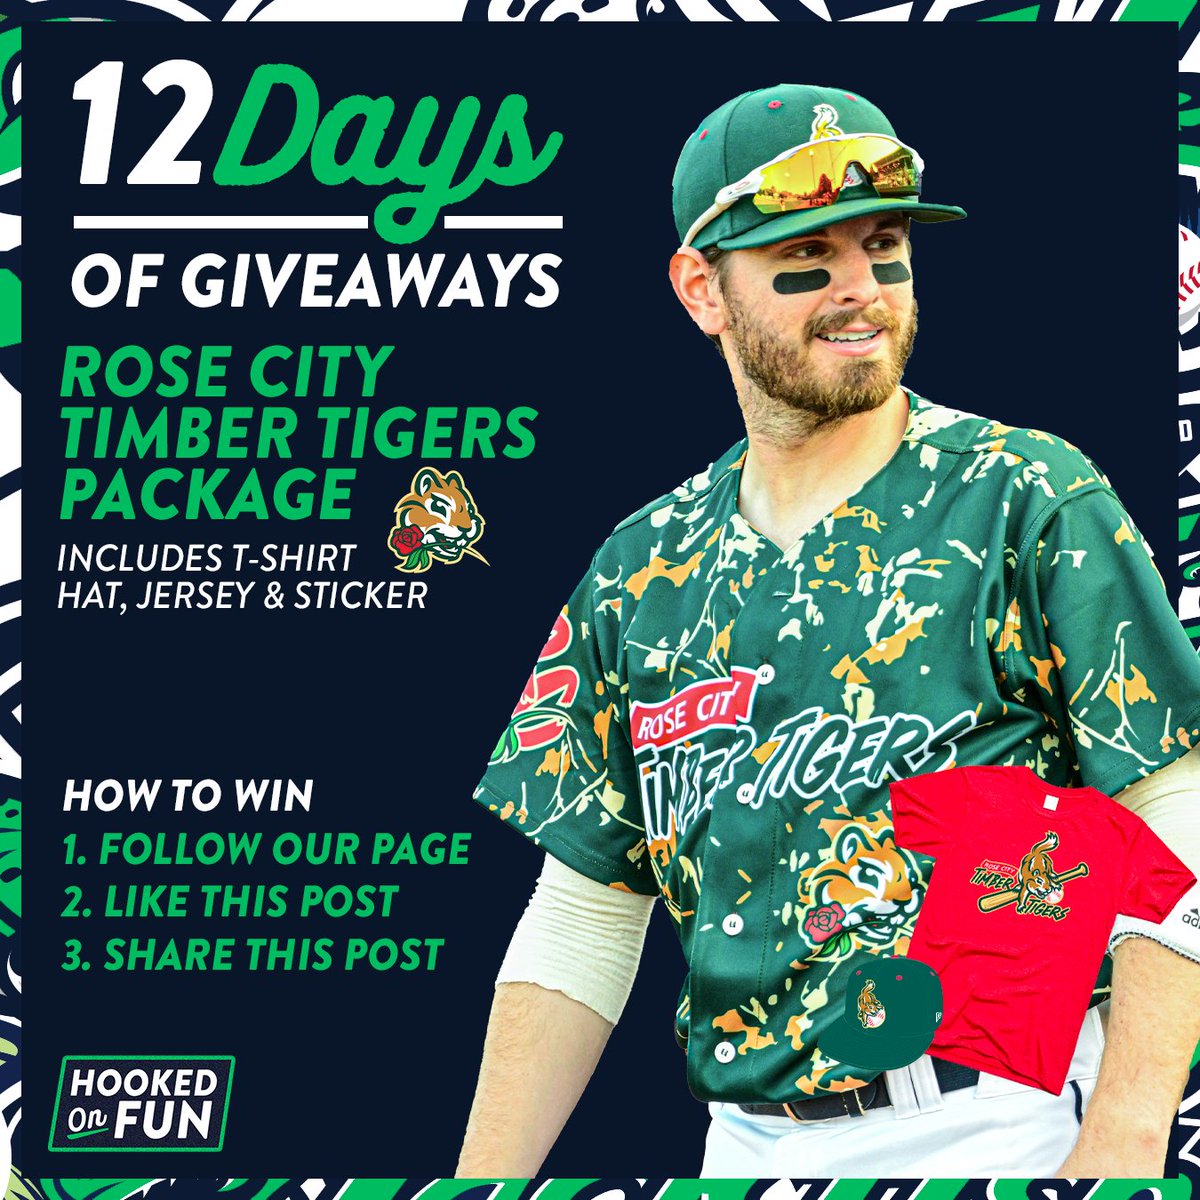 Watch out for the nutcracker, we about to #GetMunked! The biggest giveaway yet! Win a Rose City Timber Tigers hat, t-shirt, jersey and sticker! 1. Follow us 2. Like this post 3. Share this post Winner to be announced at 3pm